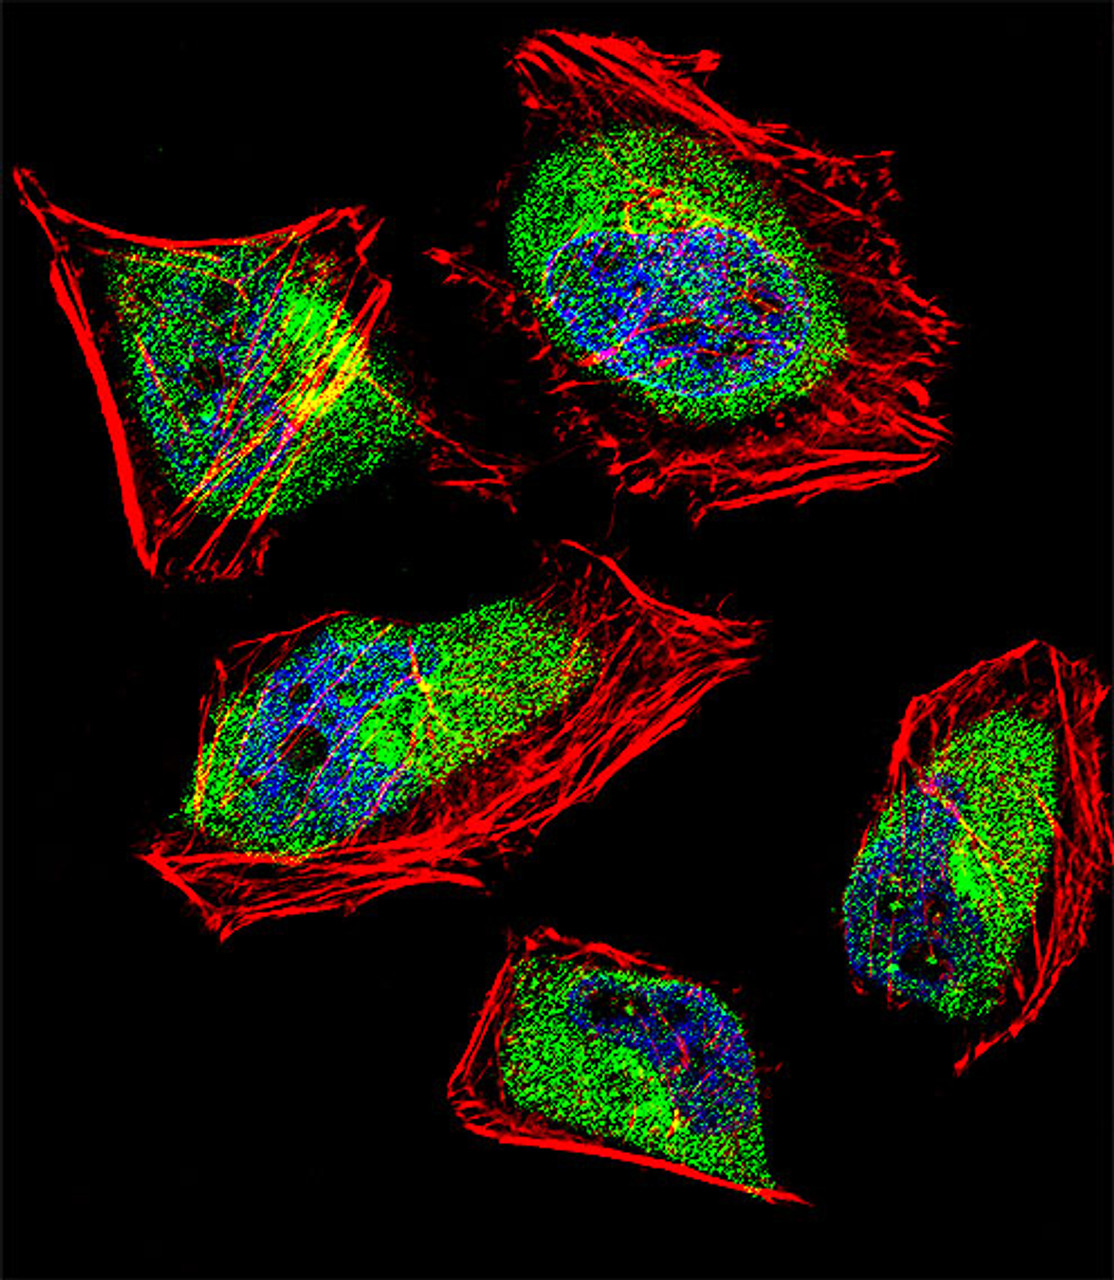 Fluorescent confocal image of Hela cell stained with CNOT8 Antibody .Hela cells were fixed with 4% PFA (20 min) , permeabilized with Triton X-100 (0.1%, 10 min) , then incubated with CNOT8 primary antibody (1:25) . For secondary antibody, Alexa Fluor 488 conjugated donkey anti-rabbit antibody (green) was used (1:400) .Cytoplasmic actin was counterstained with Alexa Fluor 555 (red) conjugated Phalloidin (7units/ml) . Nuclei were counterstained with DAPI (blue) (10 ug/ml, 10 min) . CNOT8 immunoreactivity is localized to Cytoplasm significantly and Nucleus weakly.